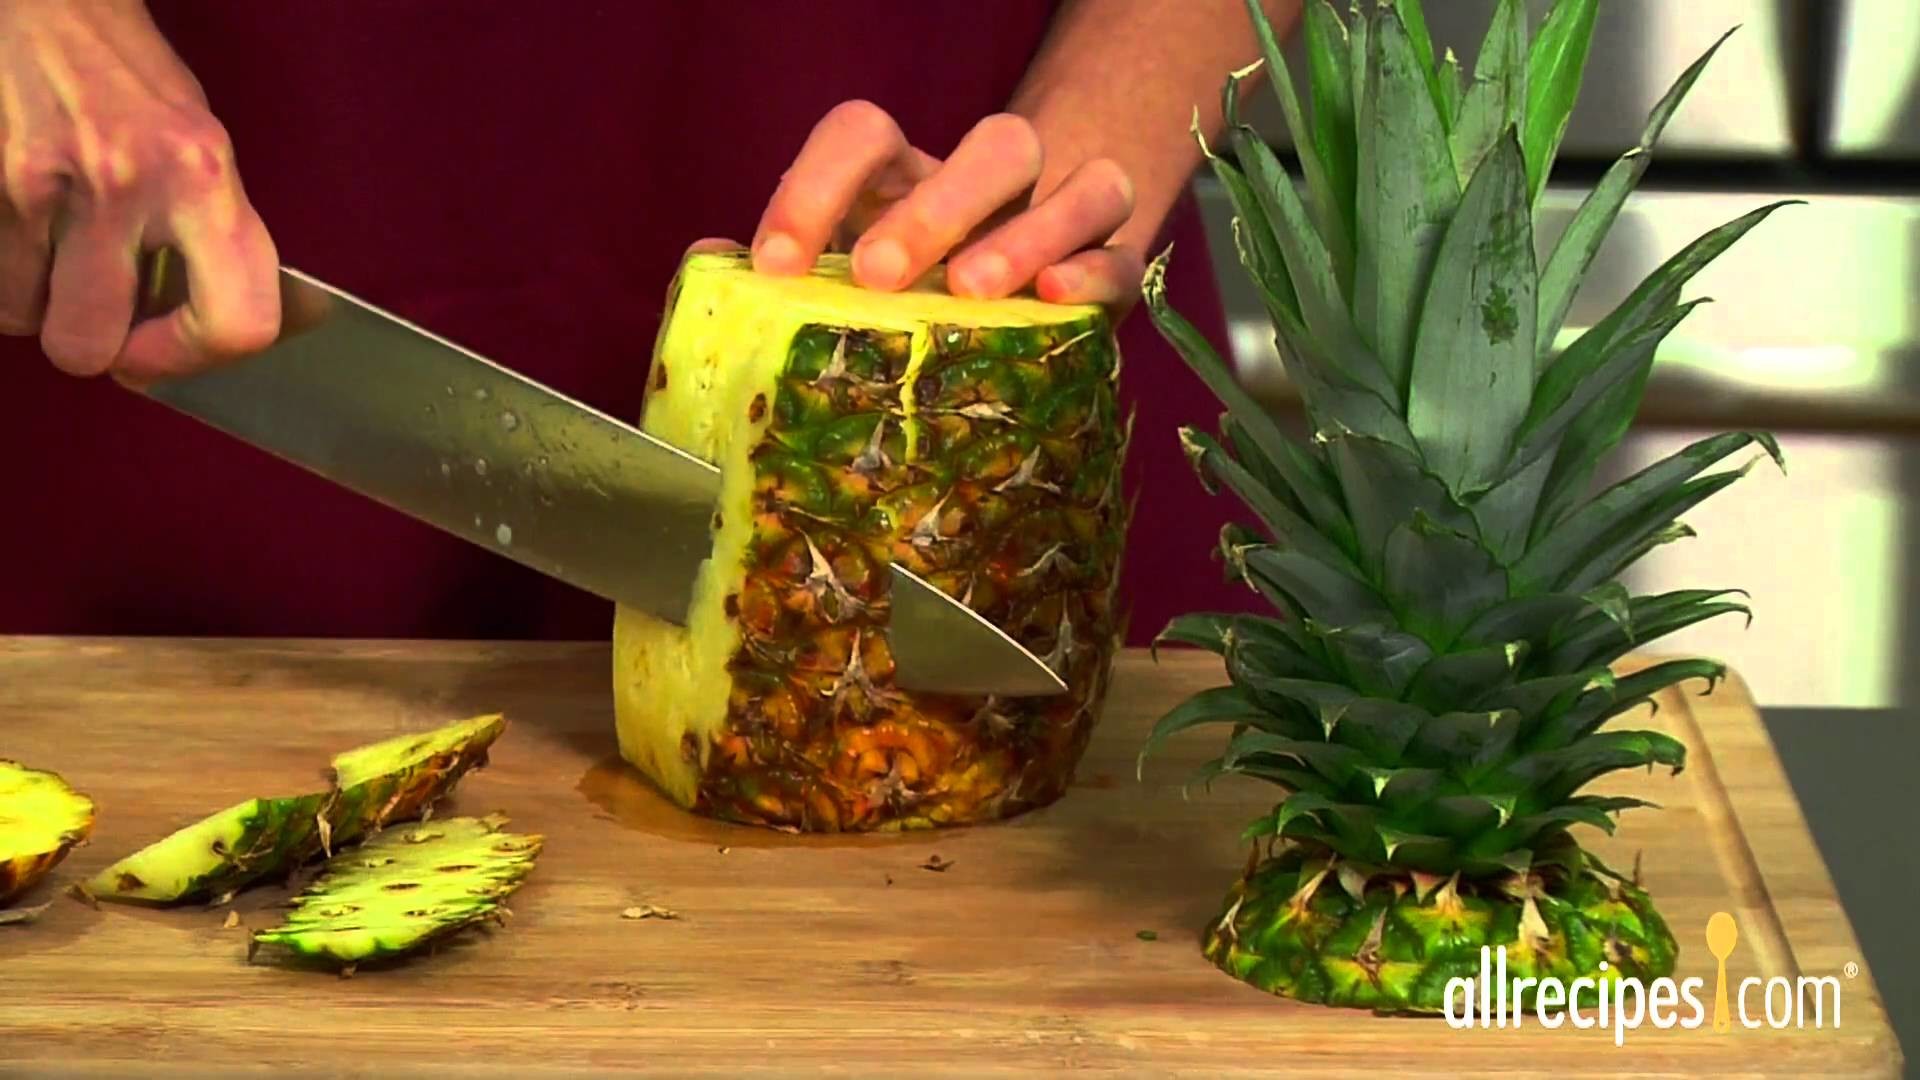 How to Cut Pineapple